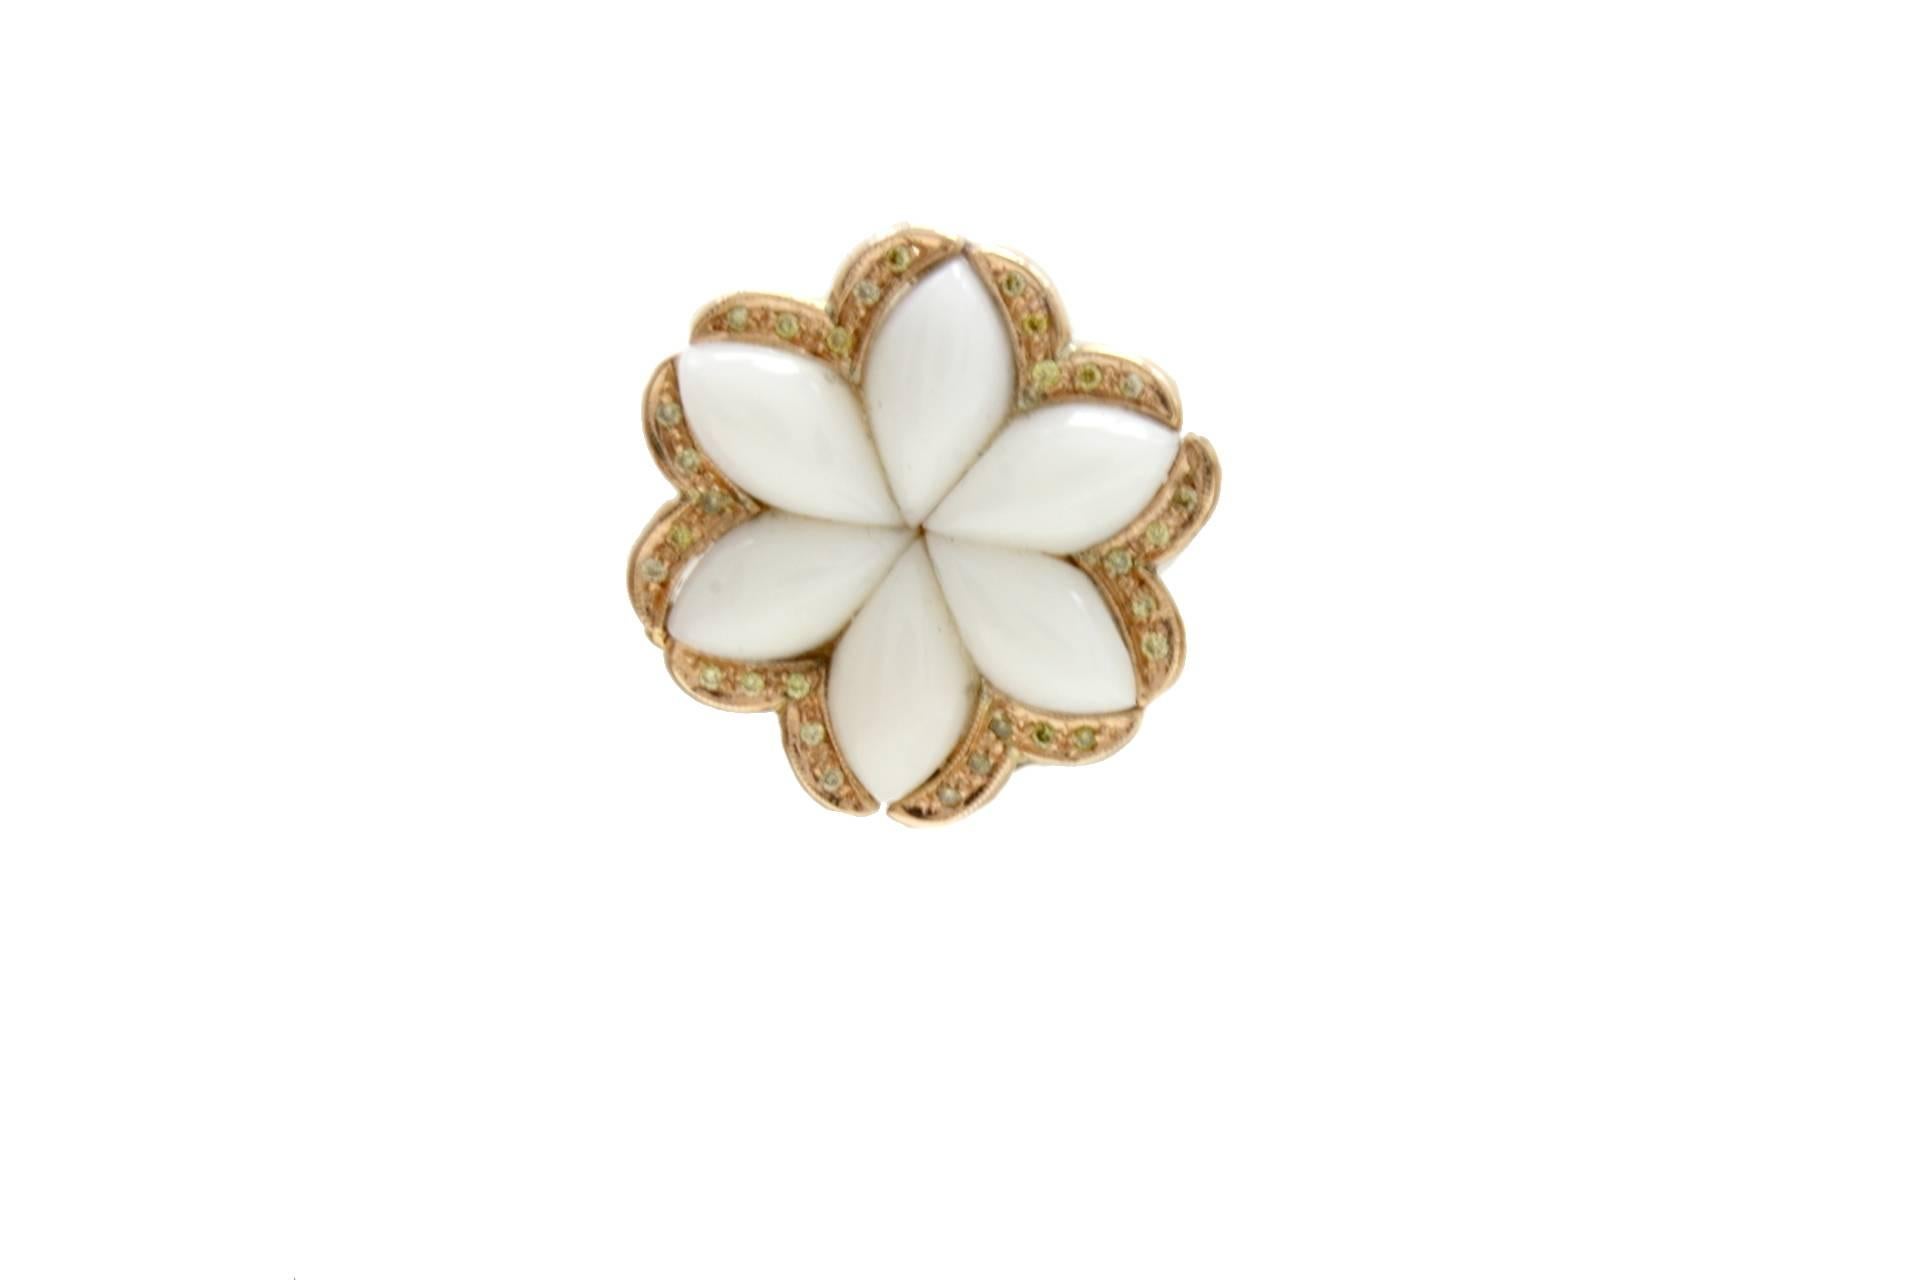 SHIPPING POLICY: 
No additional costs will be added to this order. 
Shipping costs will be totally covered by the seller (customs duties included).

Fascinating flower shaped earrings in 14K rose gold with white coral petals surrouded by fancy green